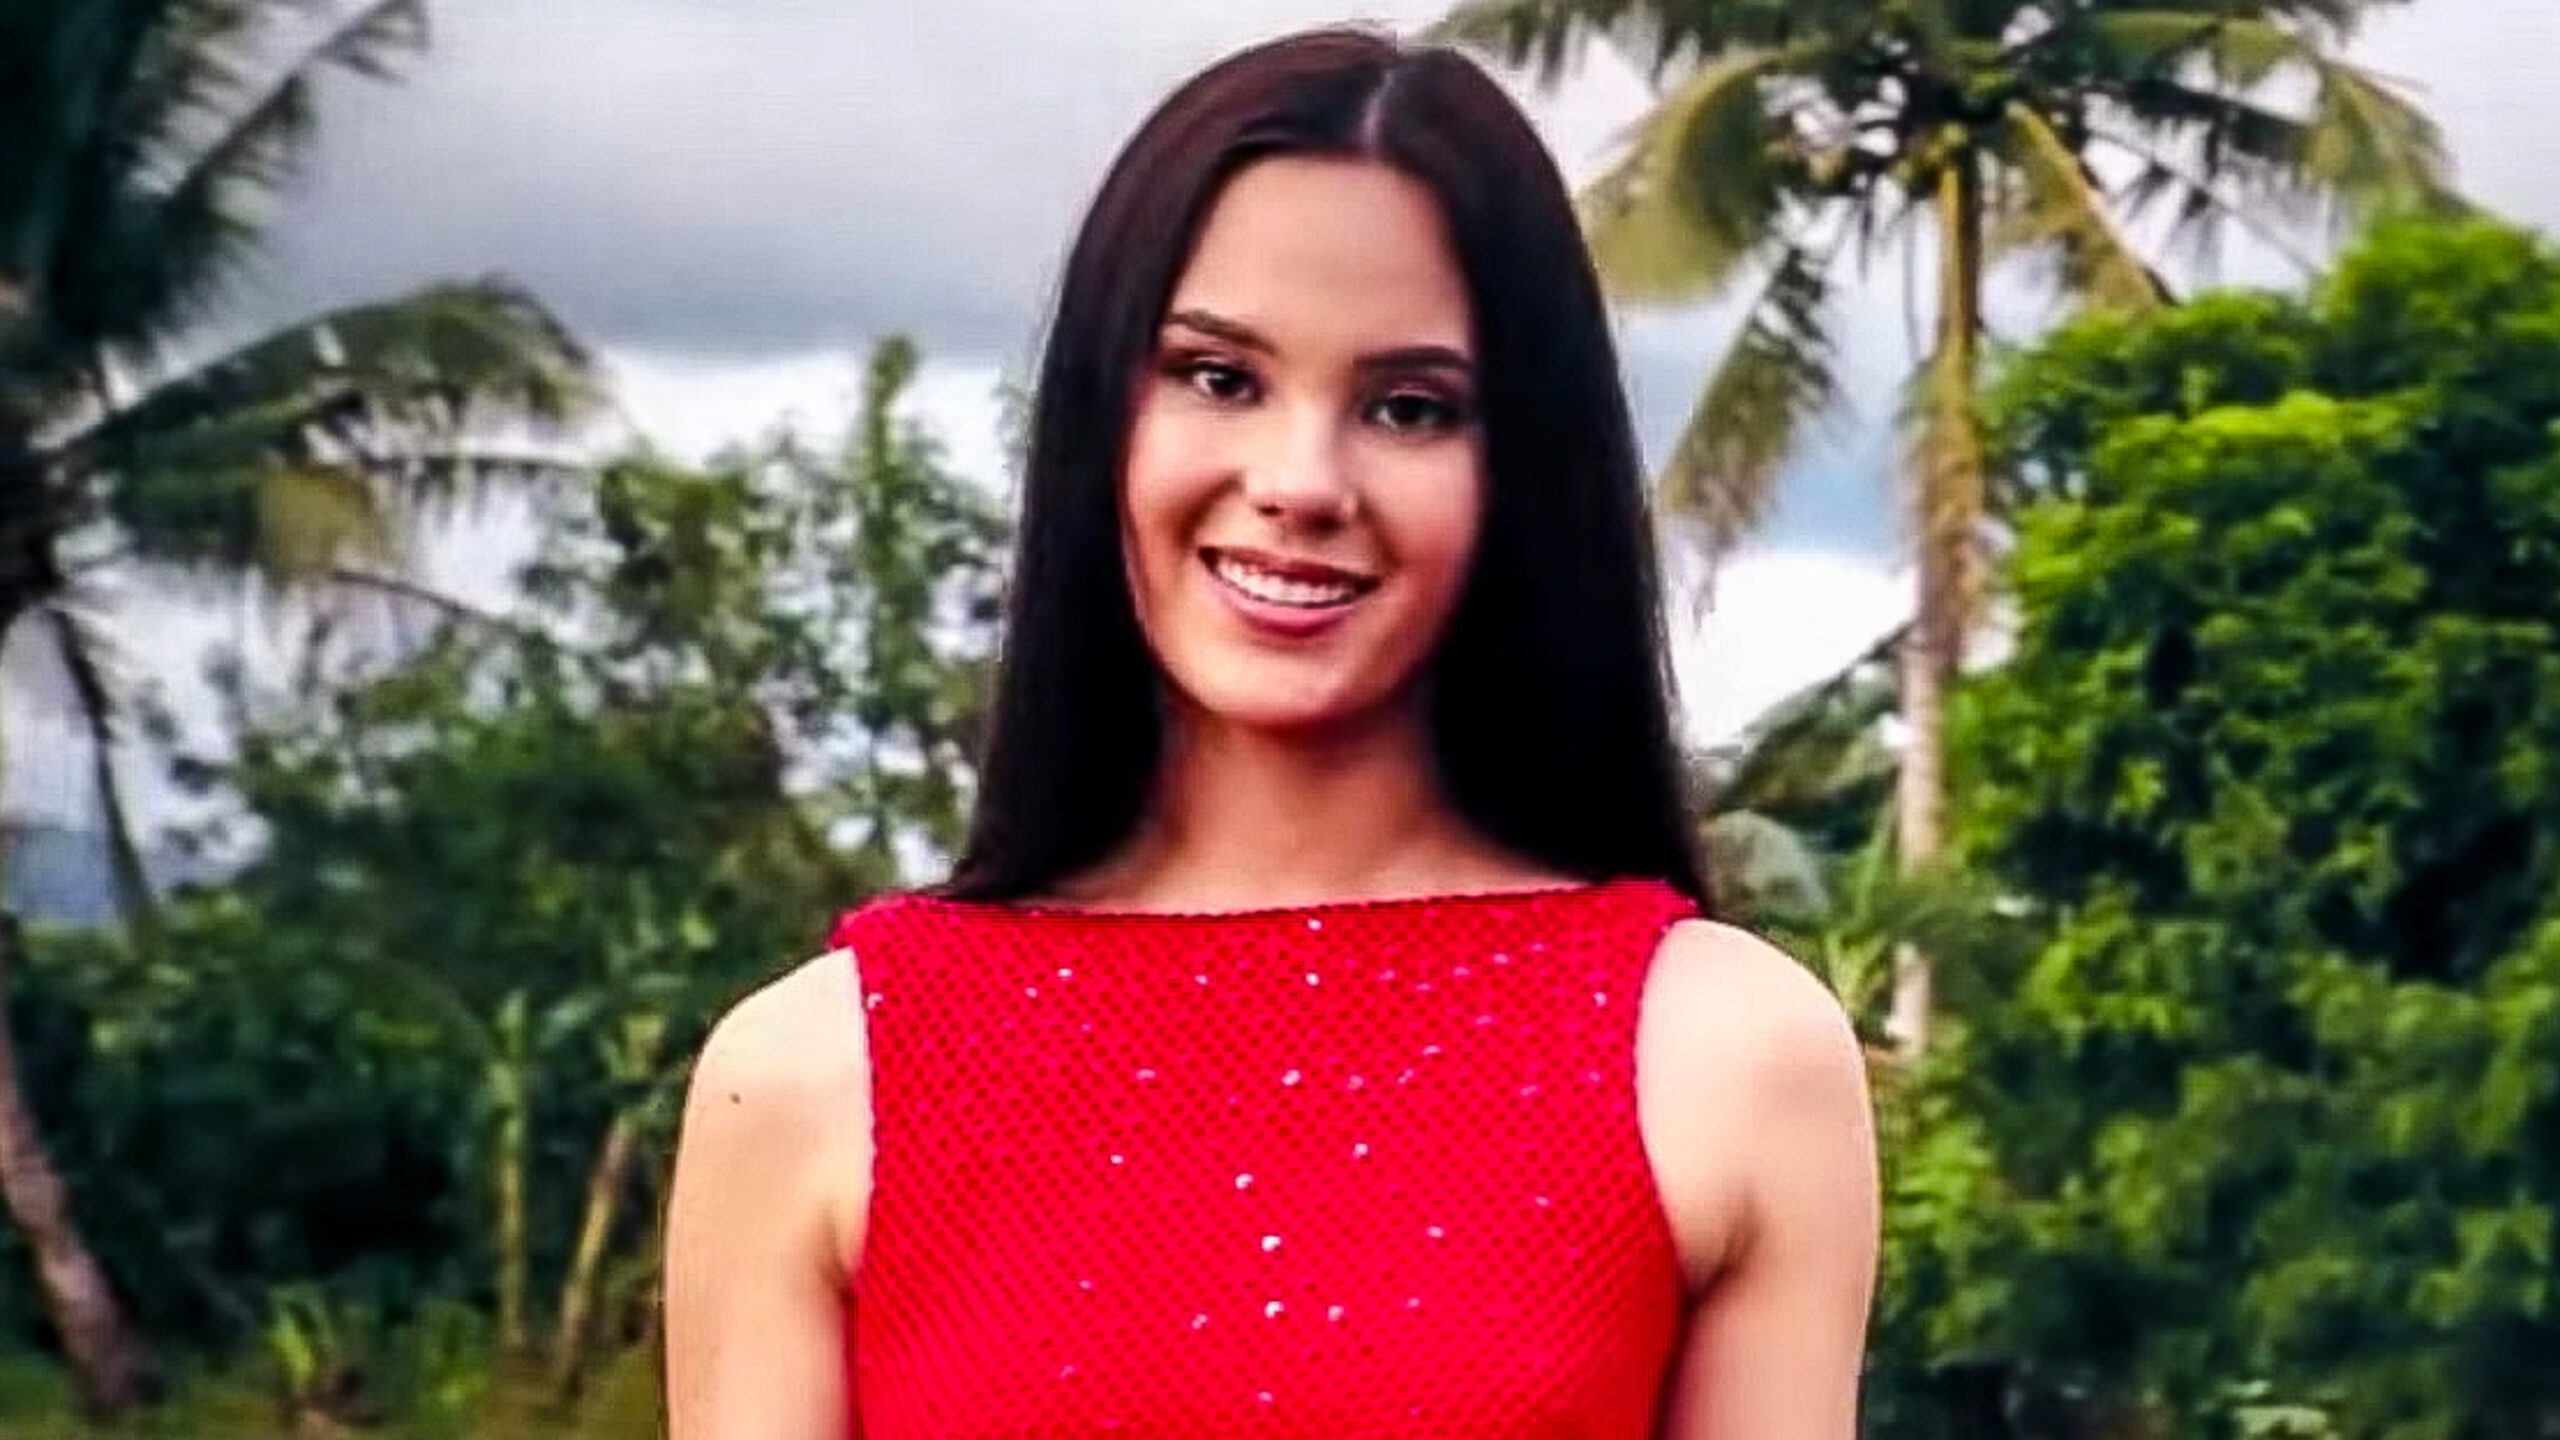 WATCH: PH’s Catriona Gray in Miss World intro video